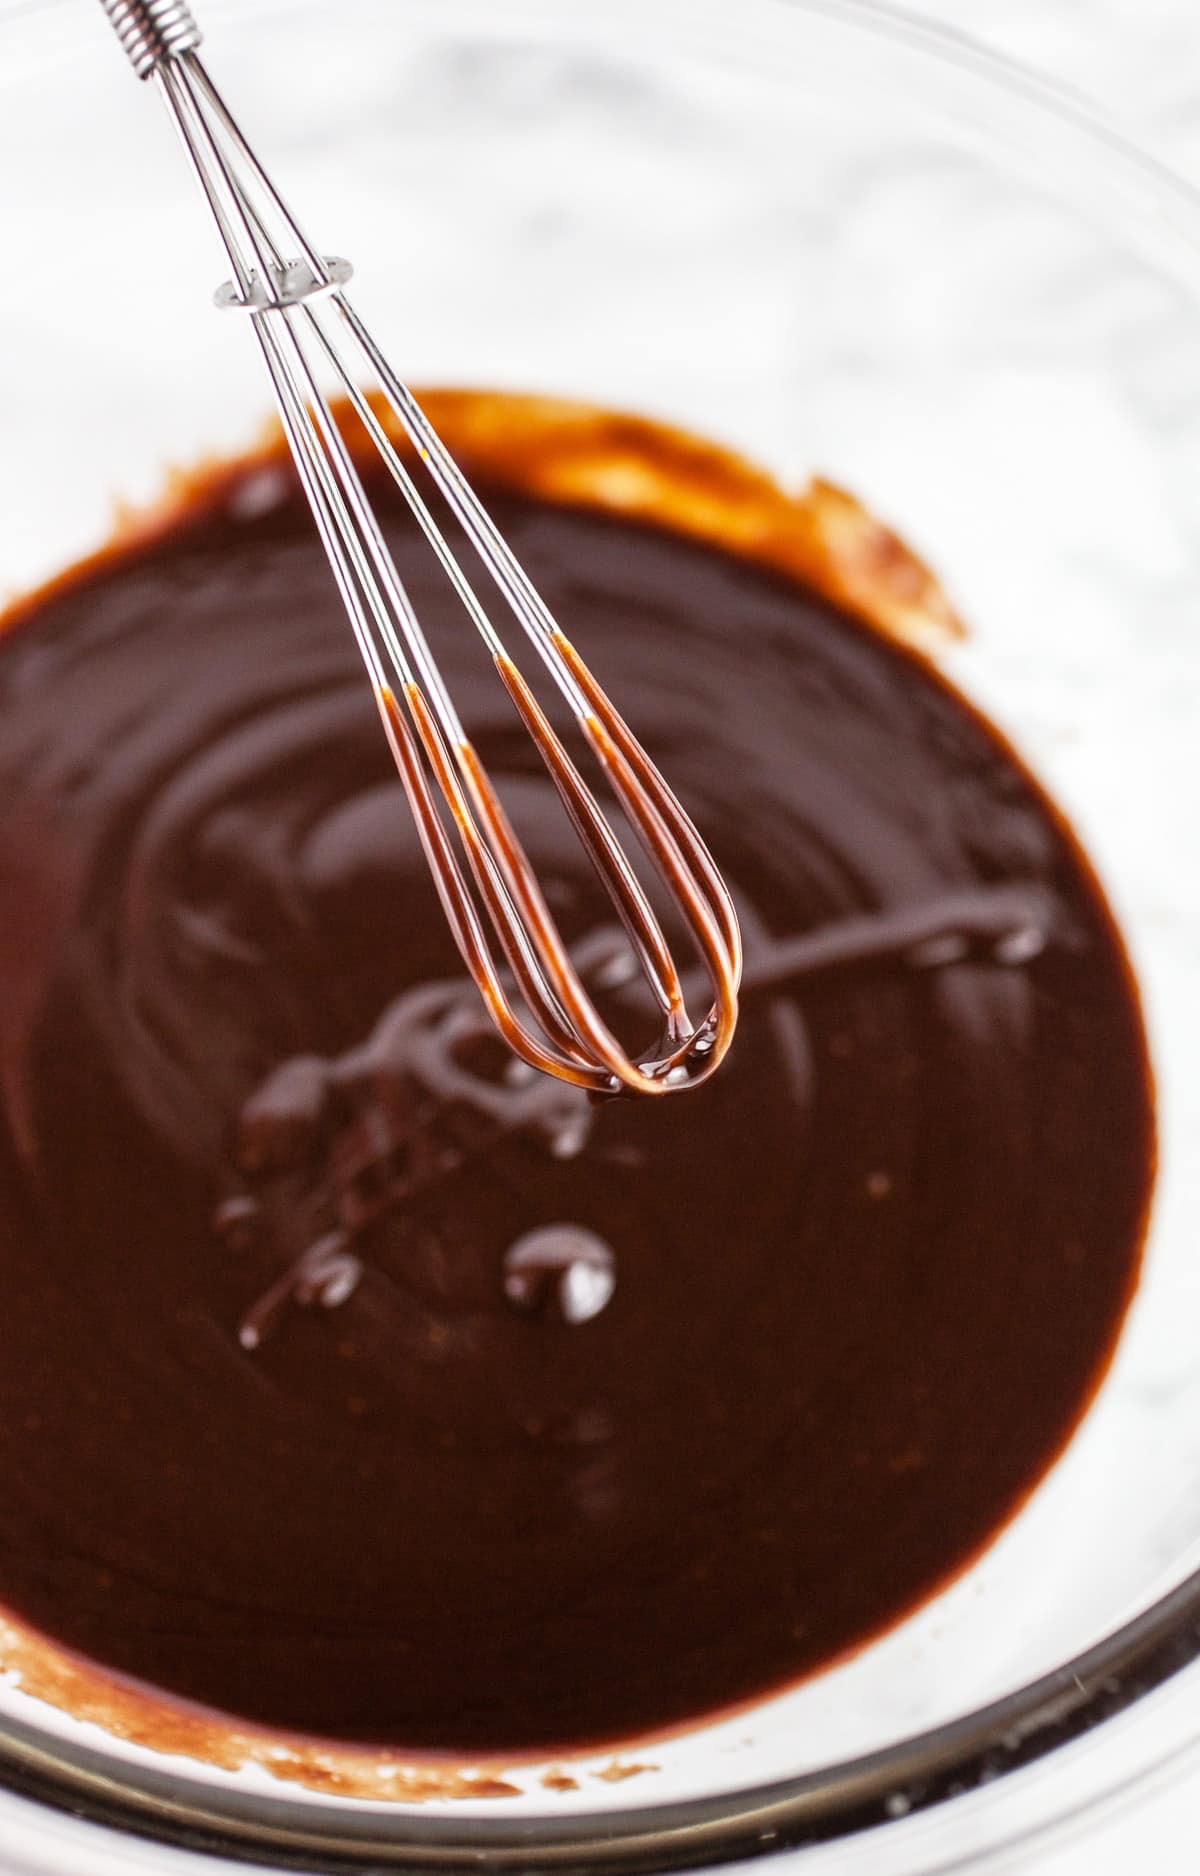 Metal whisk pulled out of glass bowl of chocolate ganache.